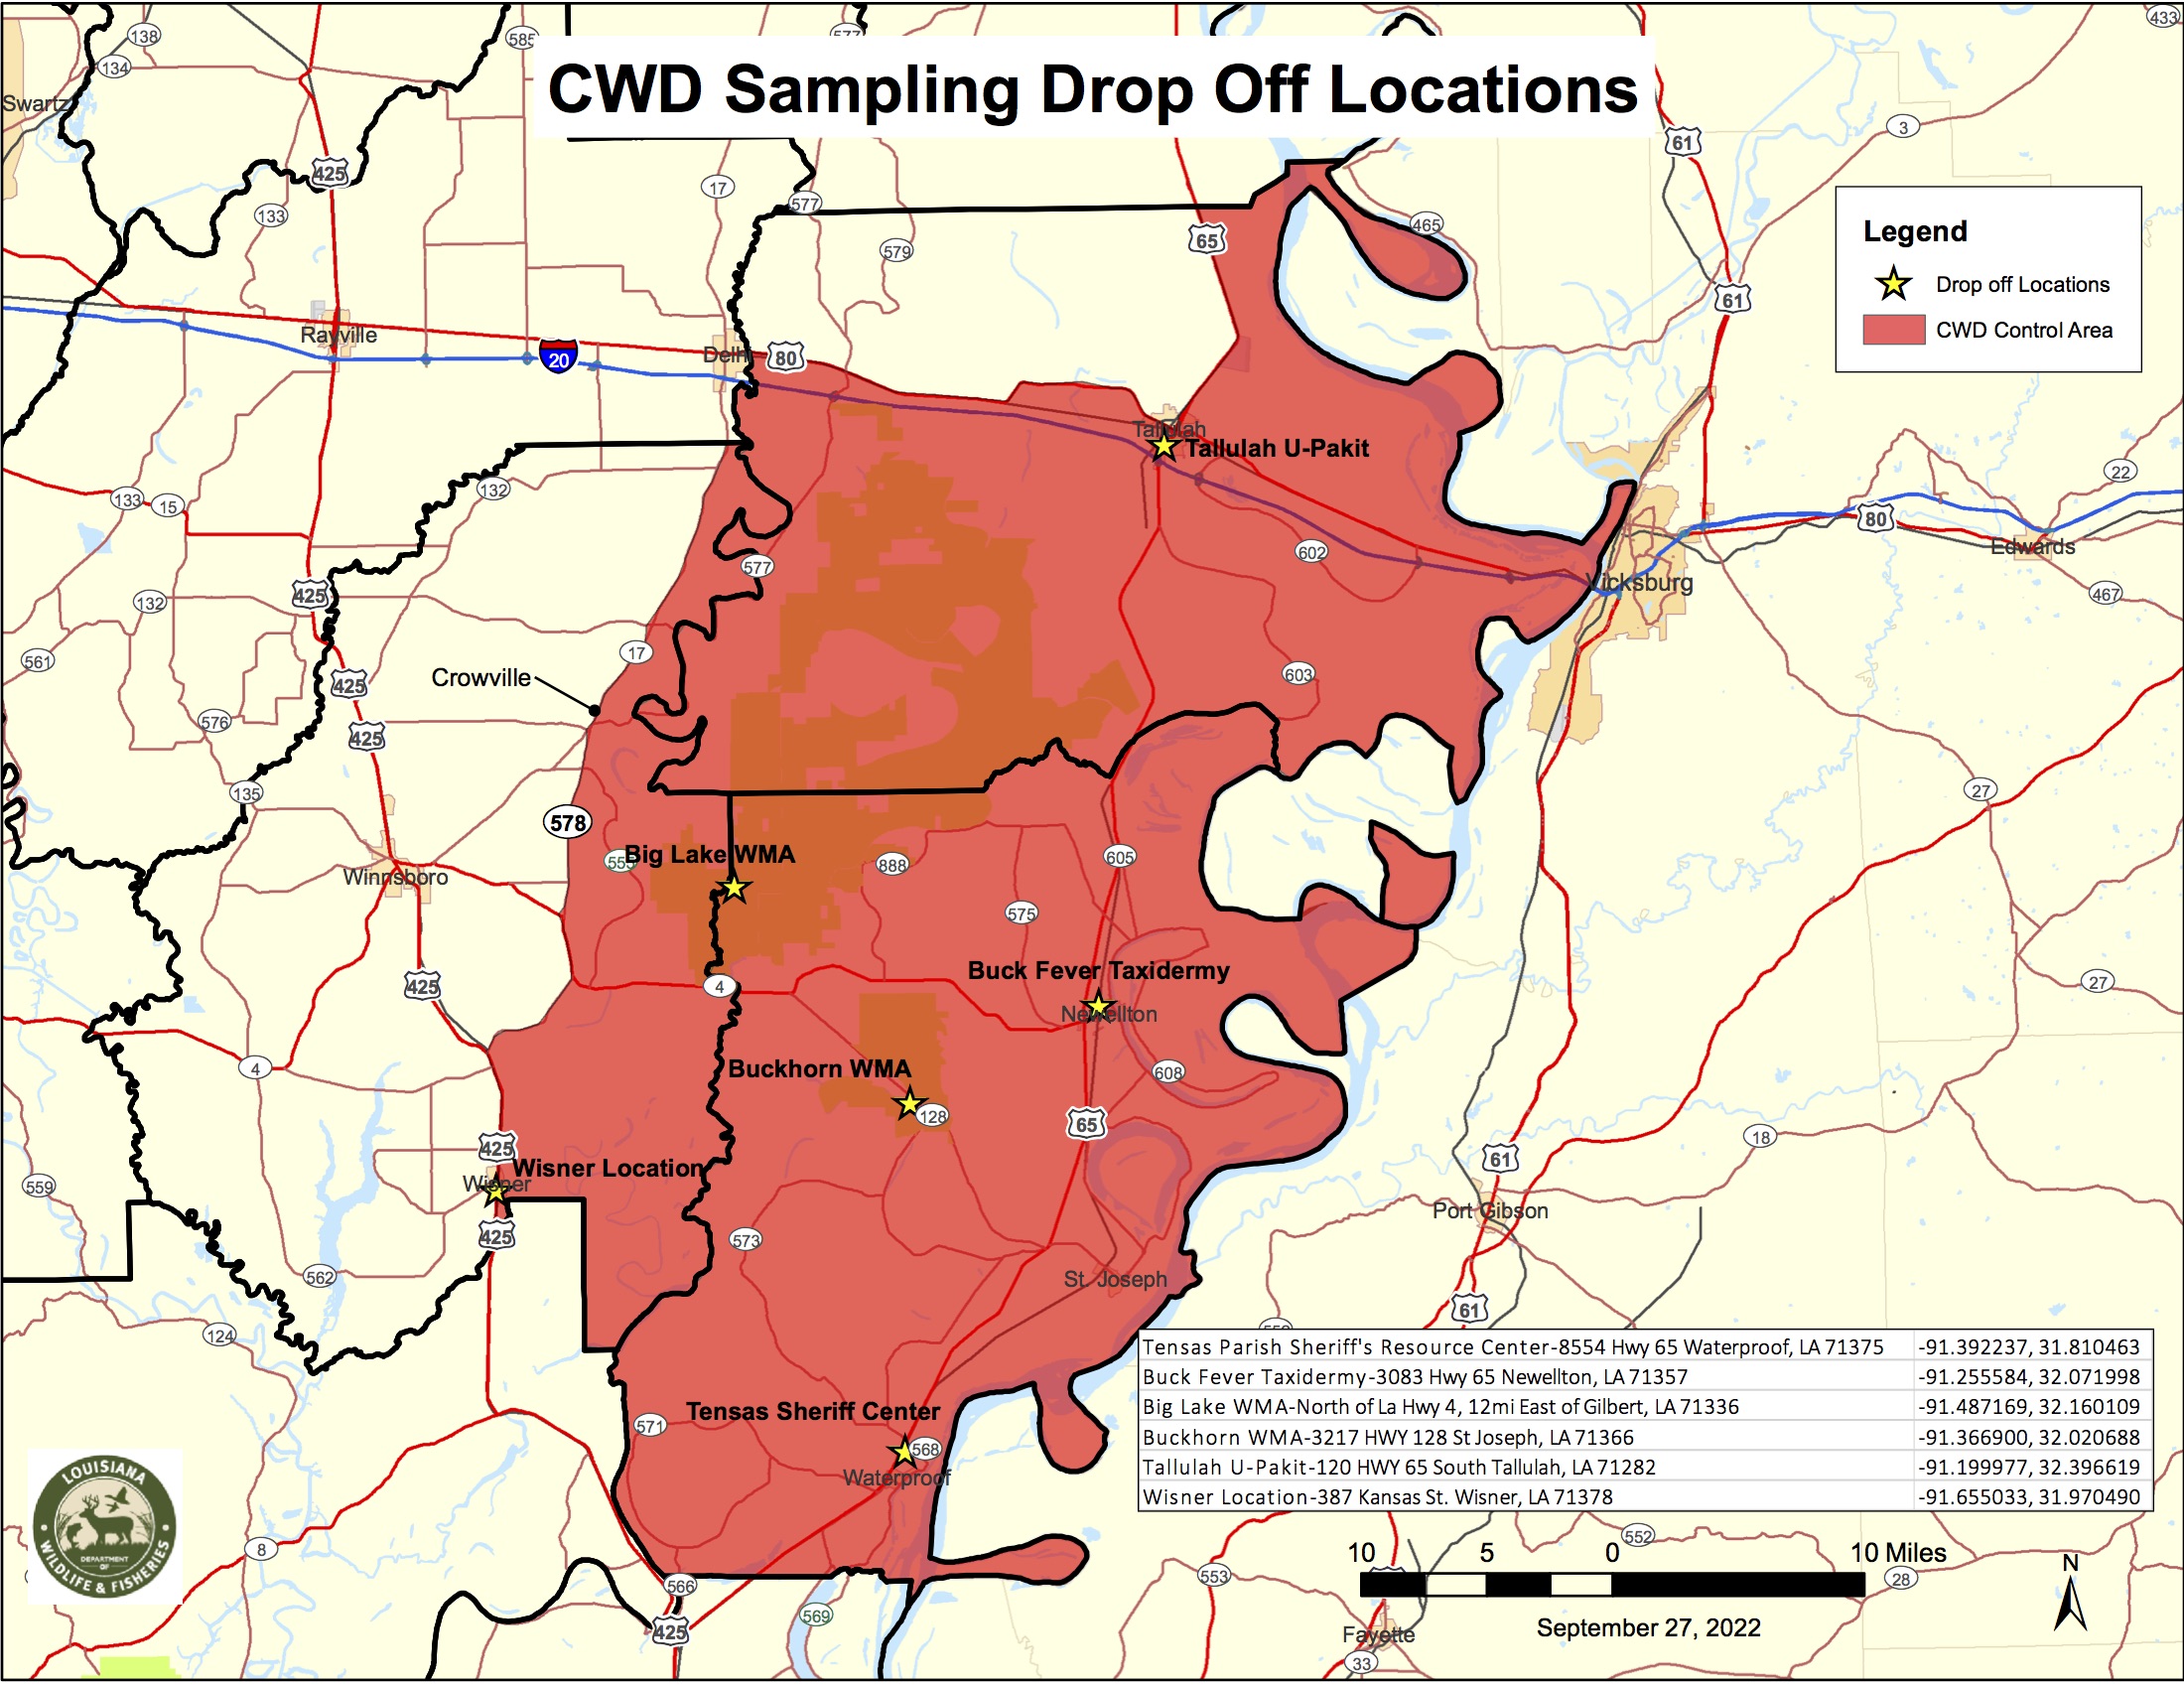 LDWF to Provide CWD Testing Dropoff Locations in Franklin, Madison and